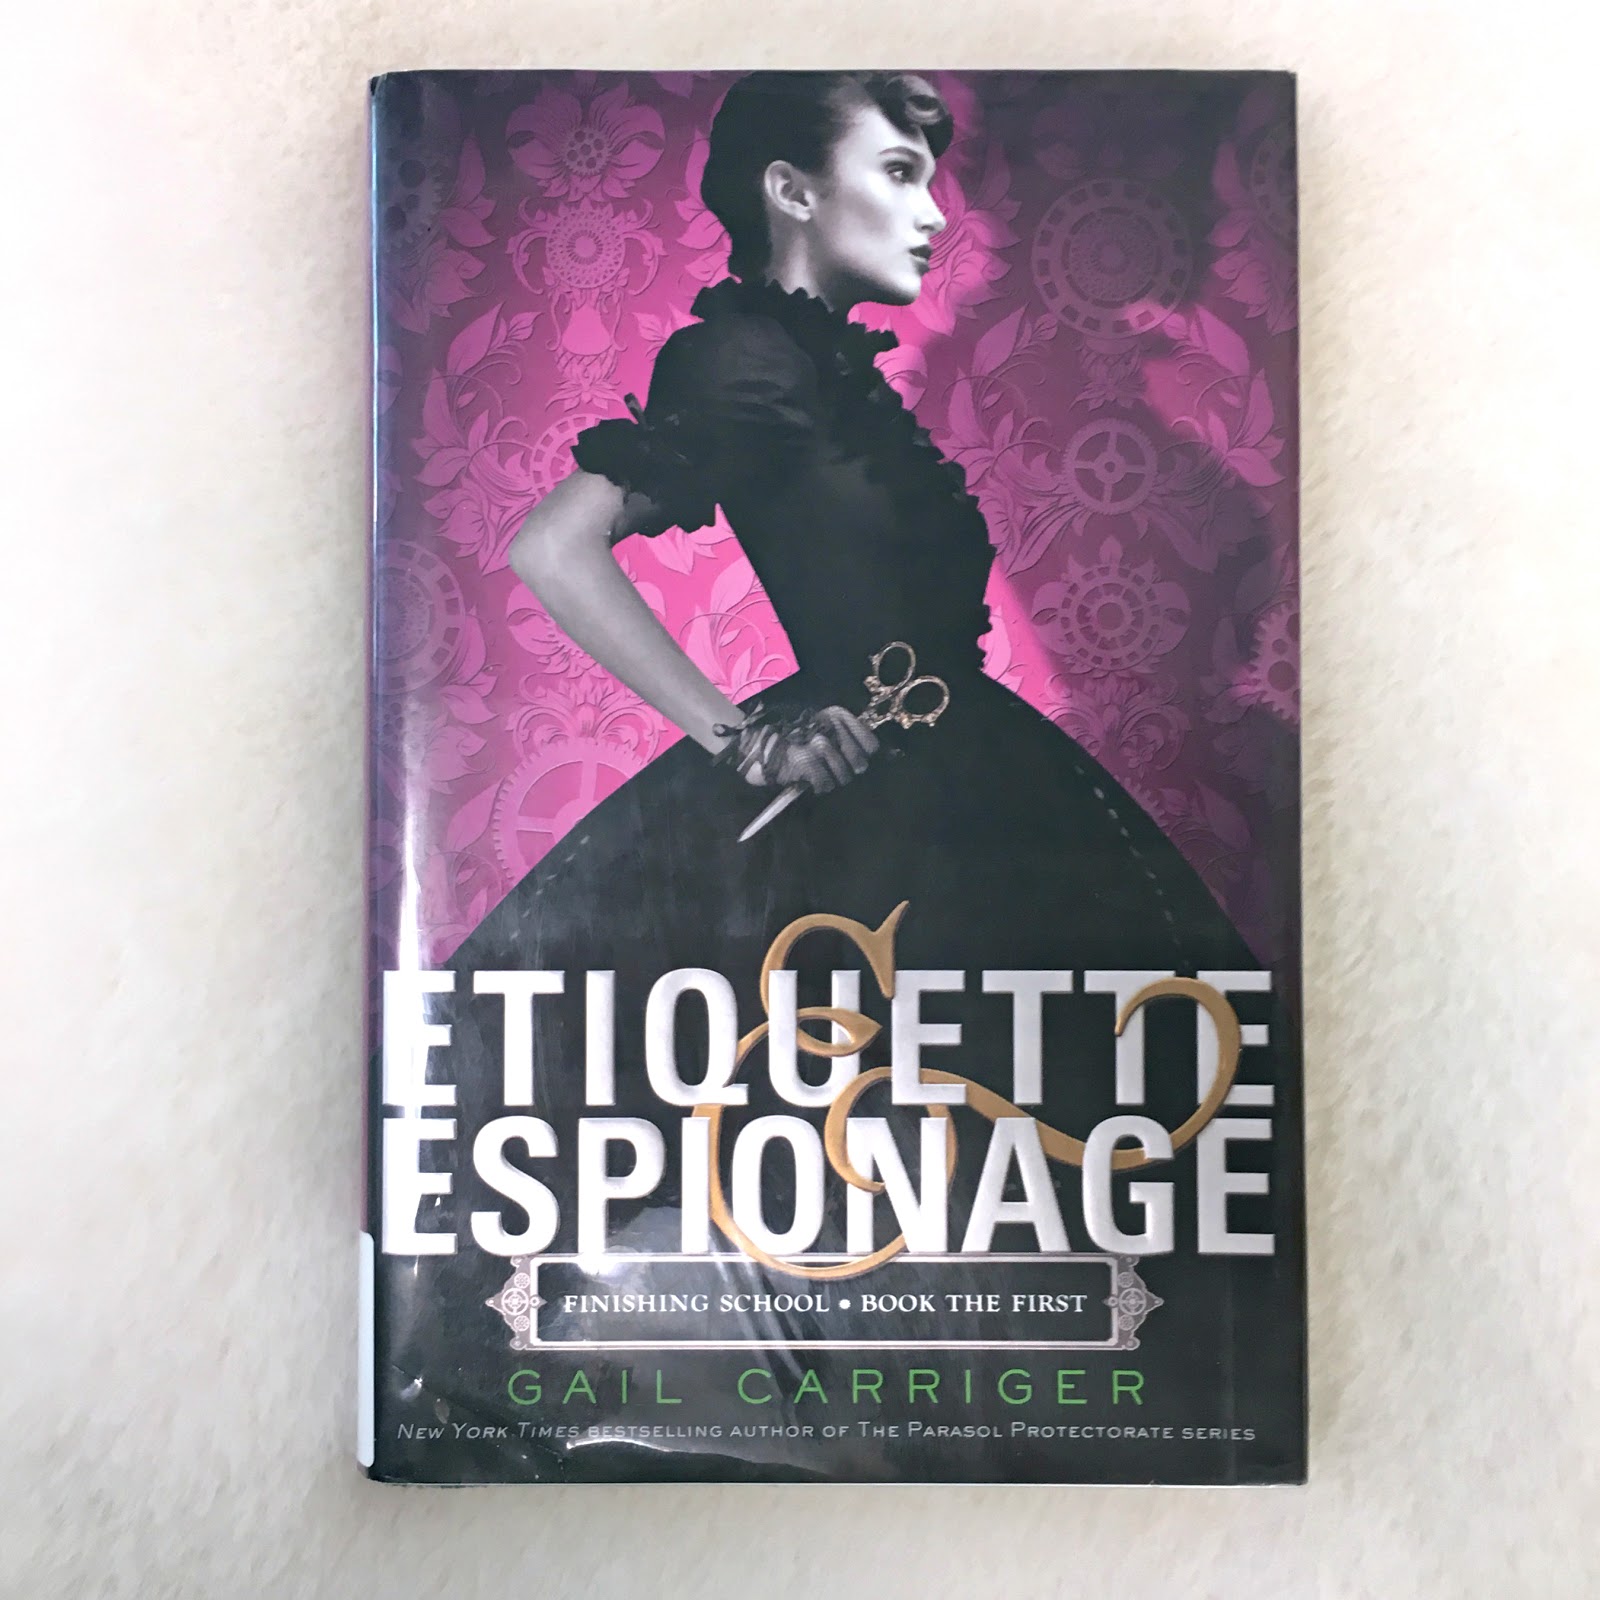 book review etiquette and espionage